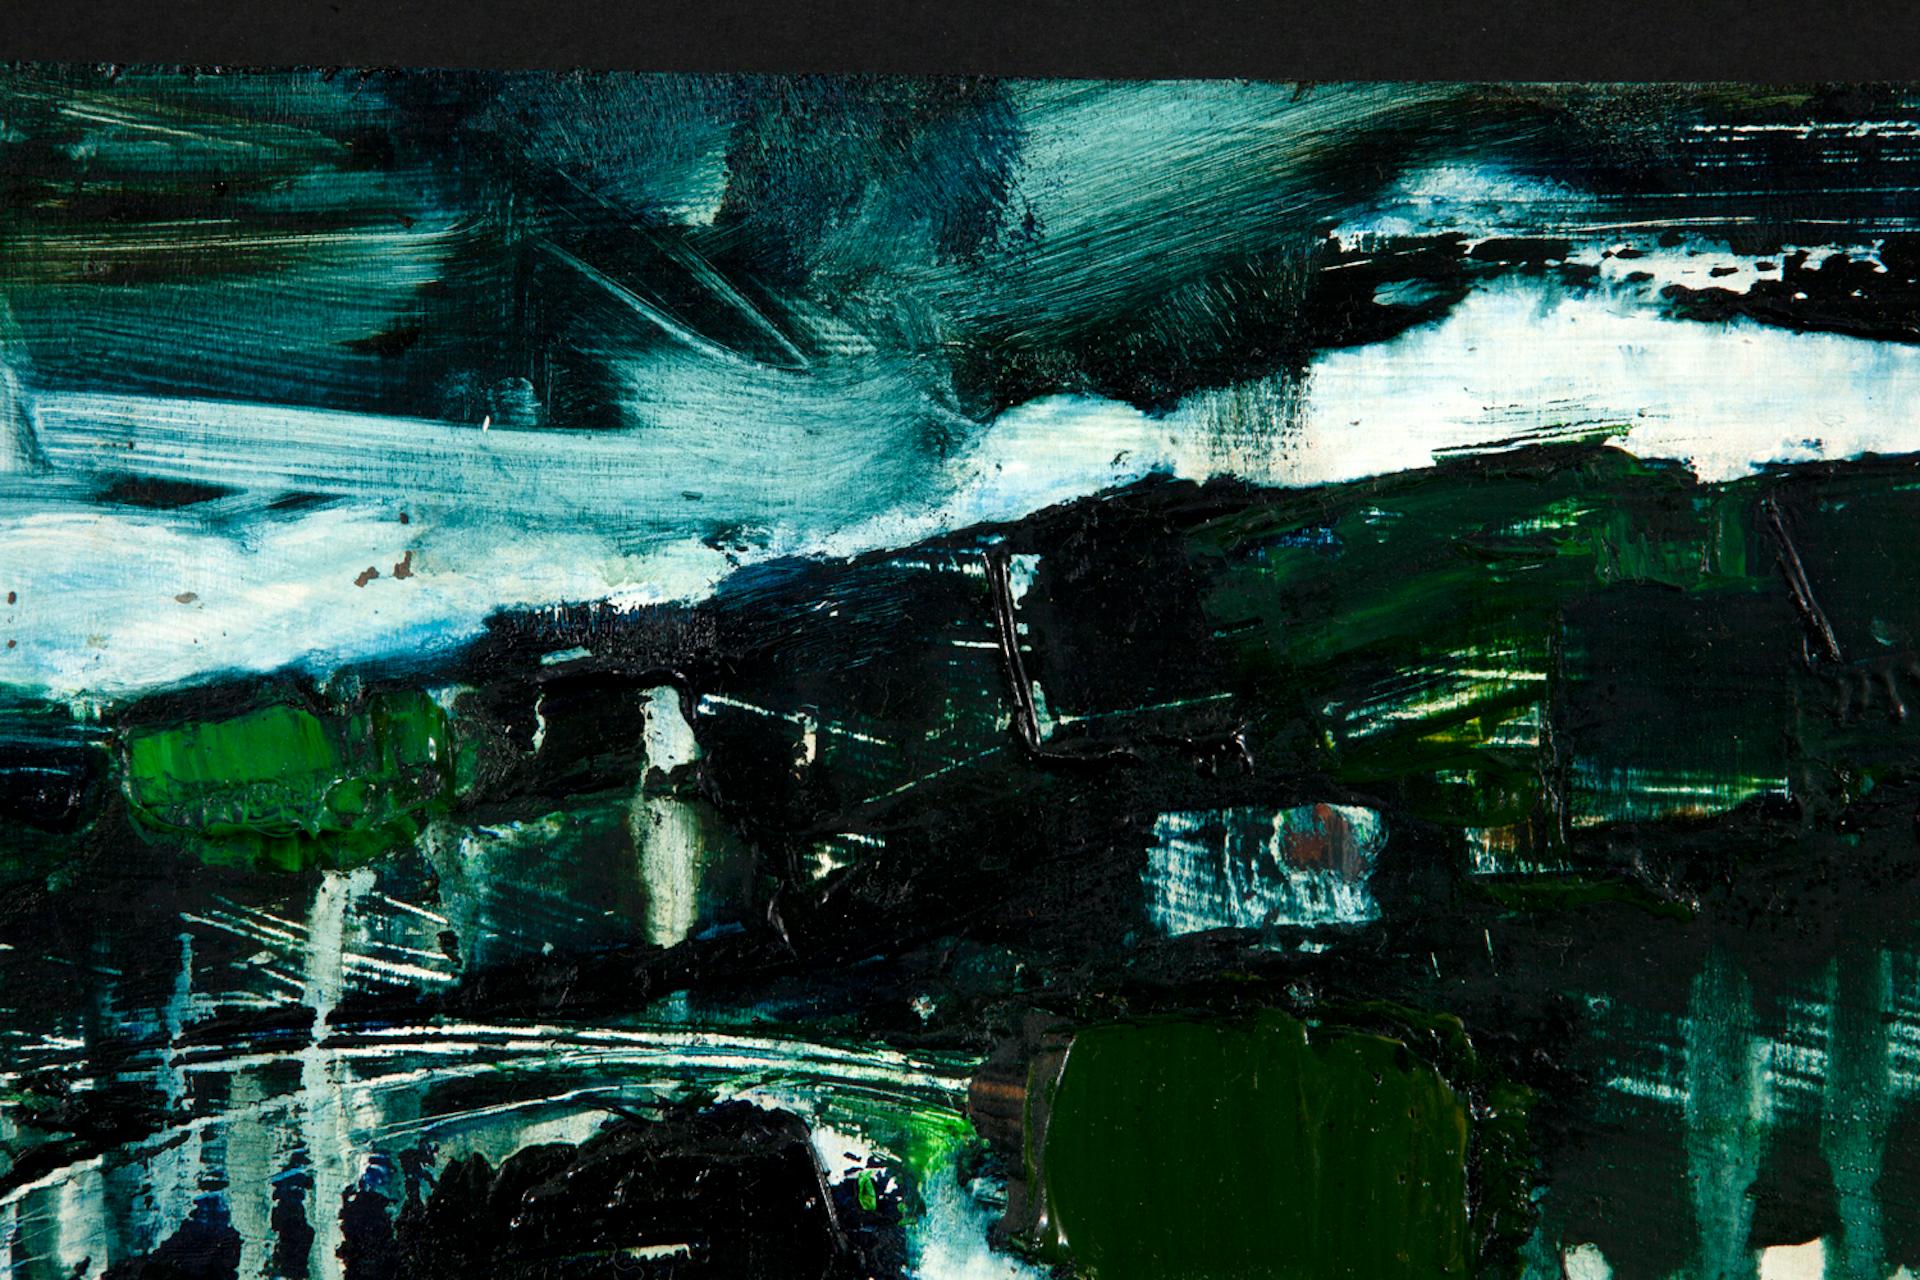 Gina Parr
Vesture
Original Abstract Landscape Painting
Oil and Acrylic on Canvas
Size: H 39cm x W 54cm x D 5cm
Sold in a Black Wooden Tray Frame
(Please note that in situ images are purely an indication of how a piece may look).

Vesture is an